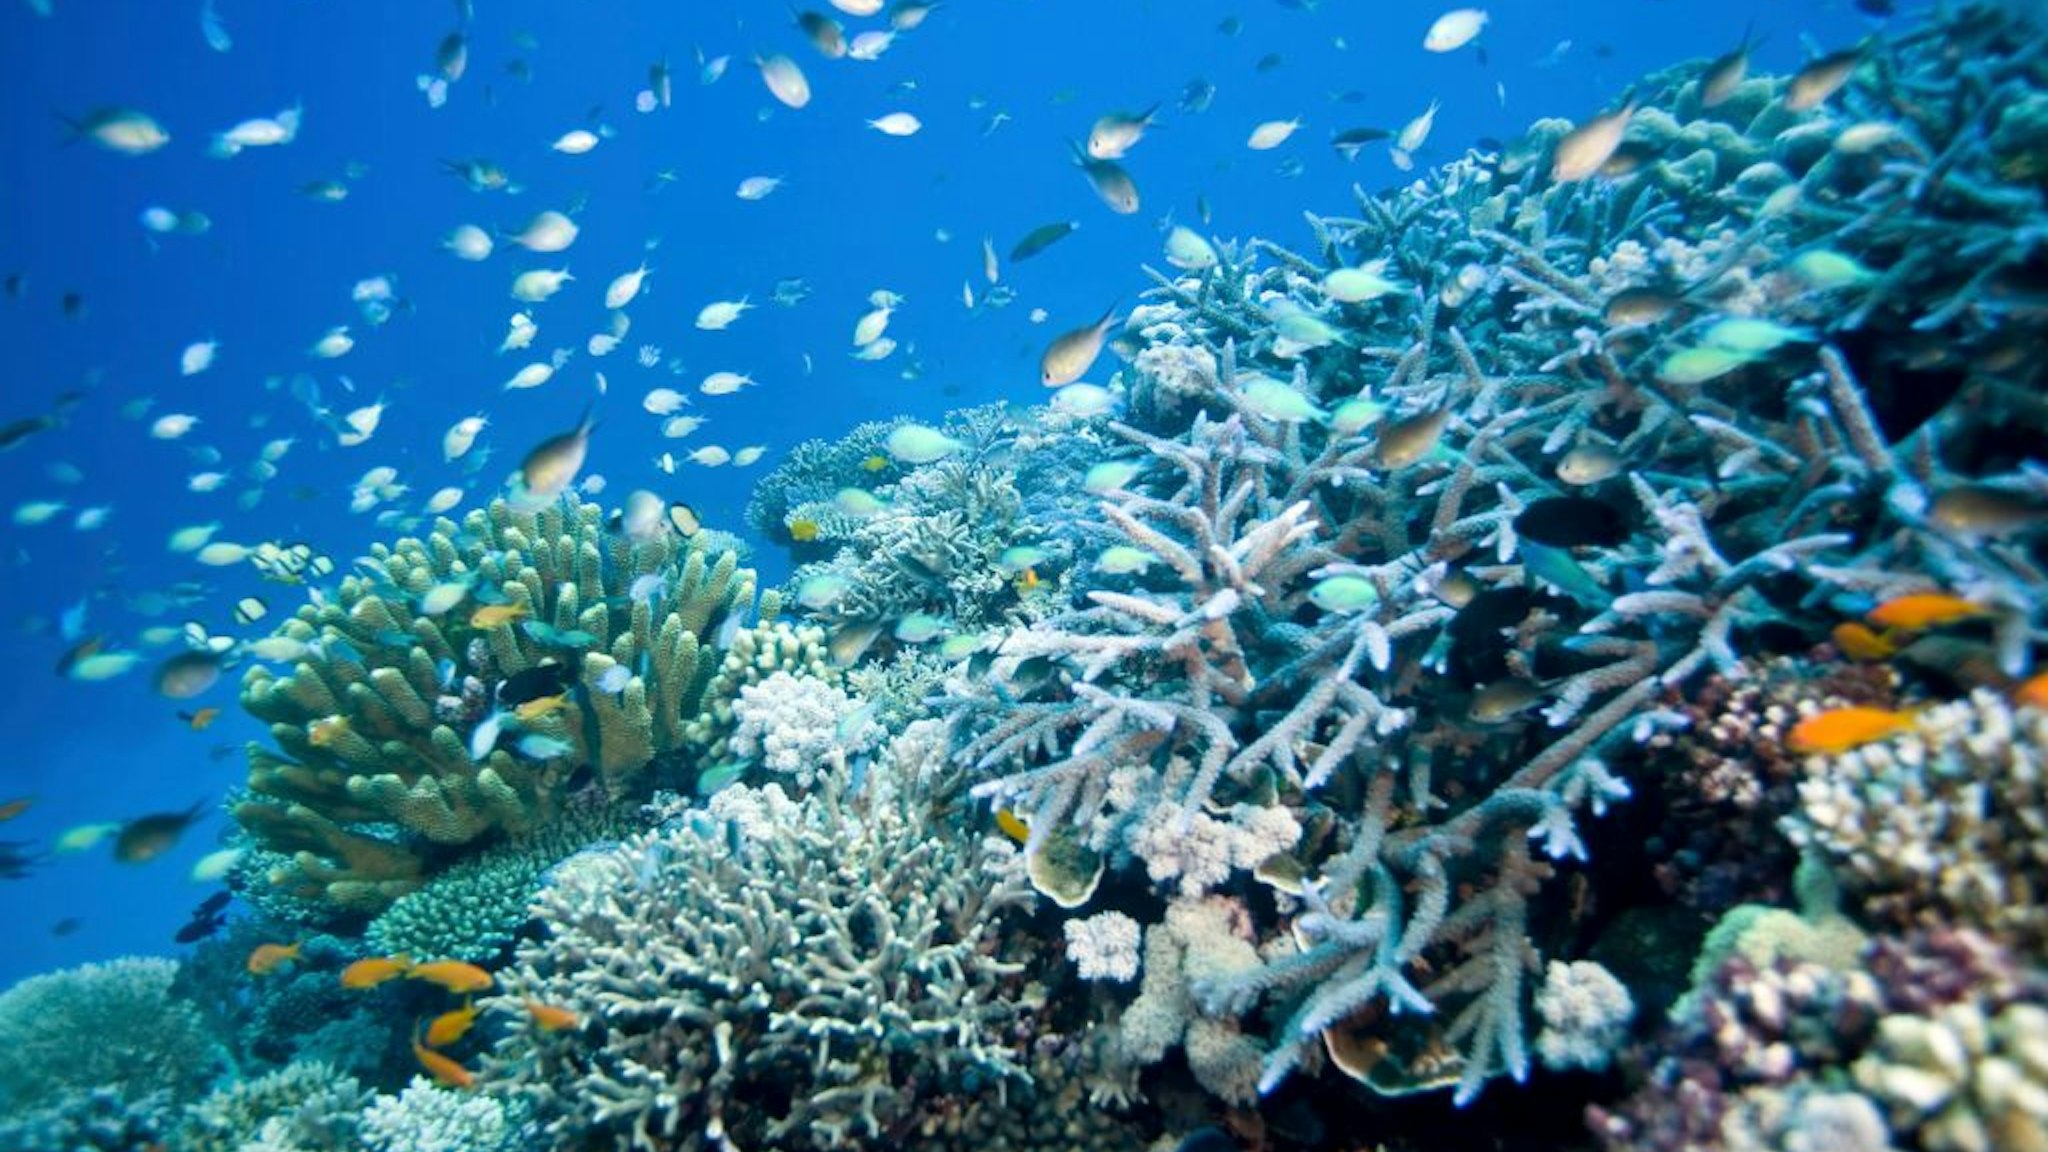 Reef scene with fish and corals. Wheeler Reef, Great Barrier Reef off Townsville, Queensland, Australia. (Photo by Auscape/Universal Images Group via Getty Images)